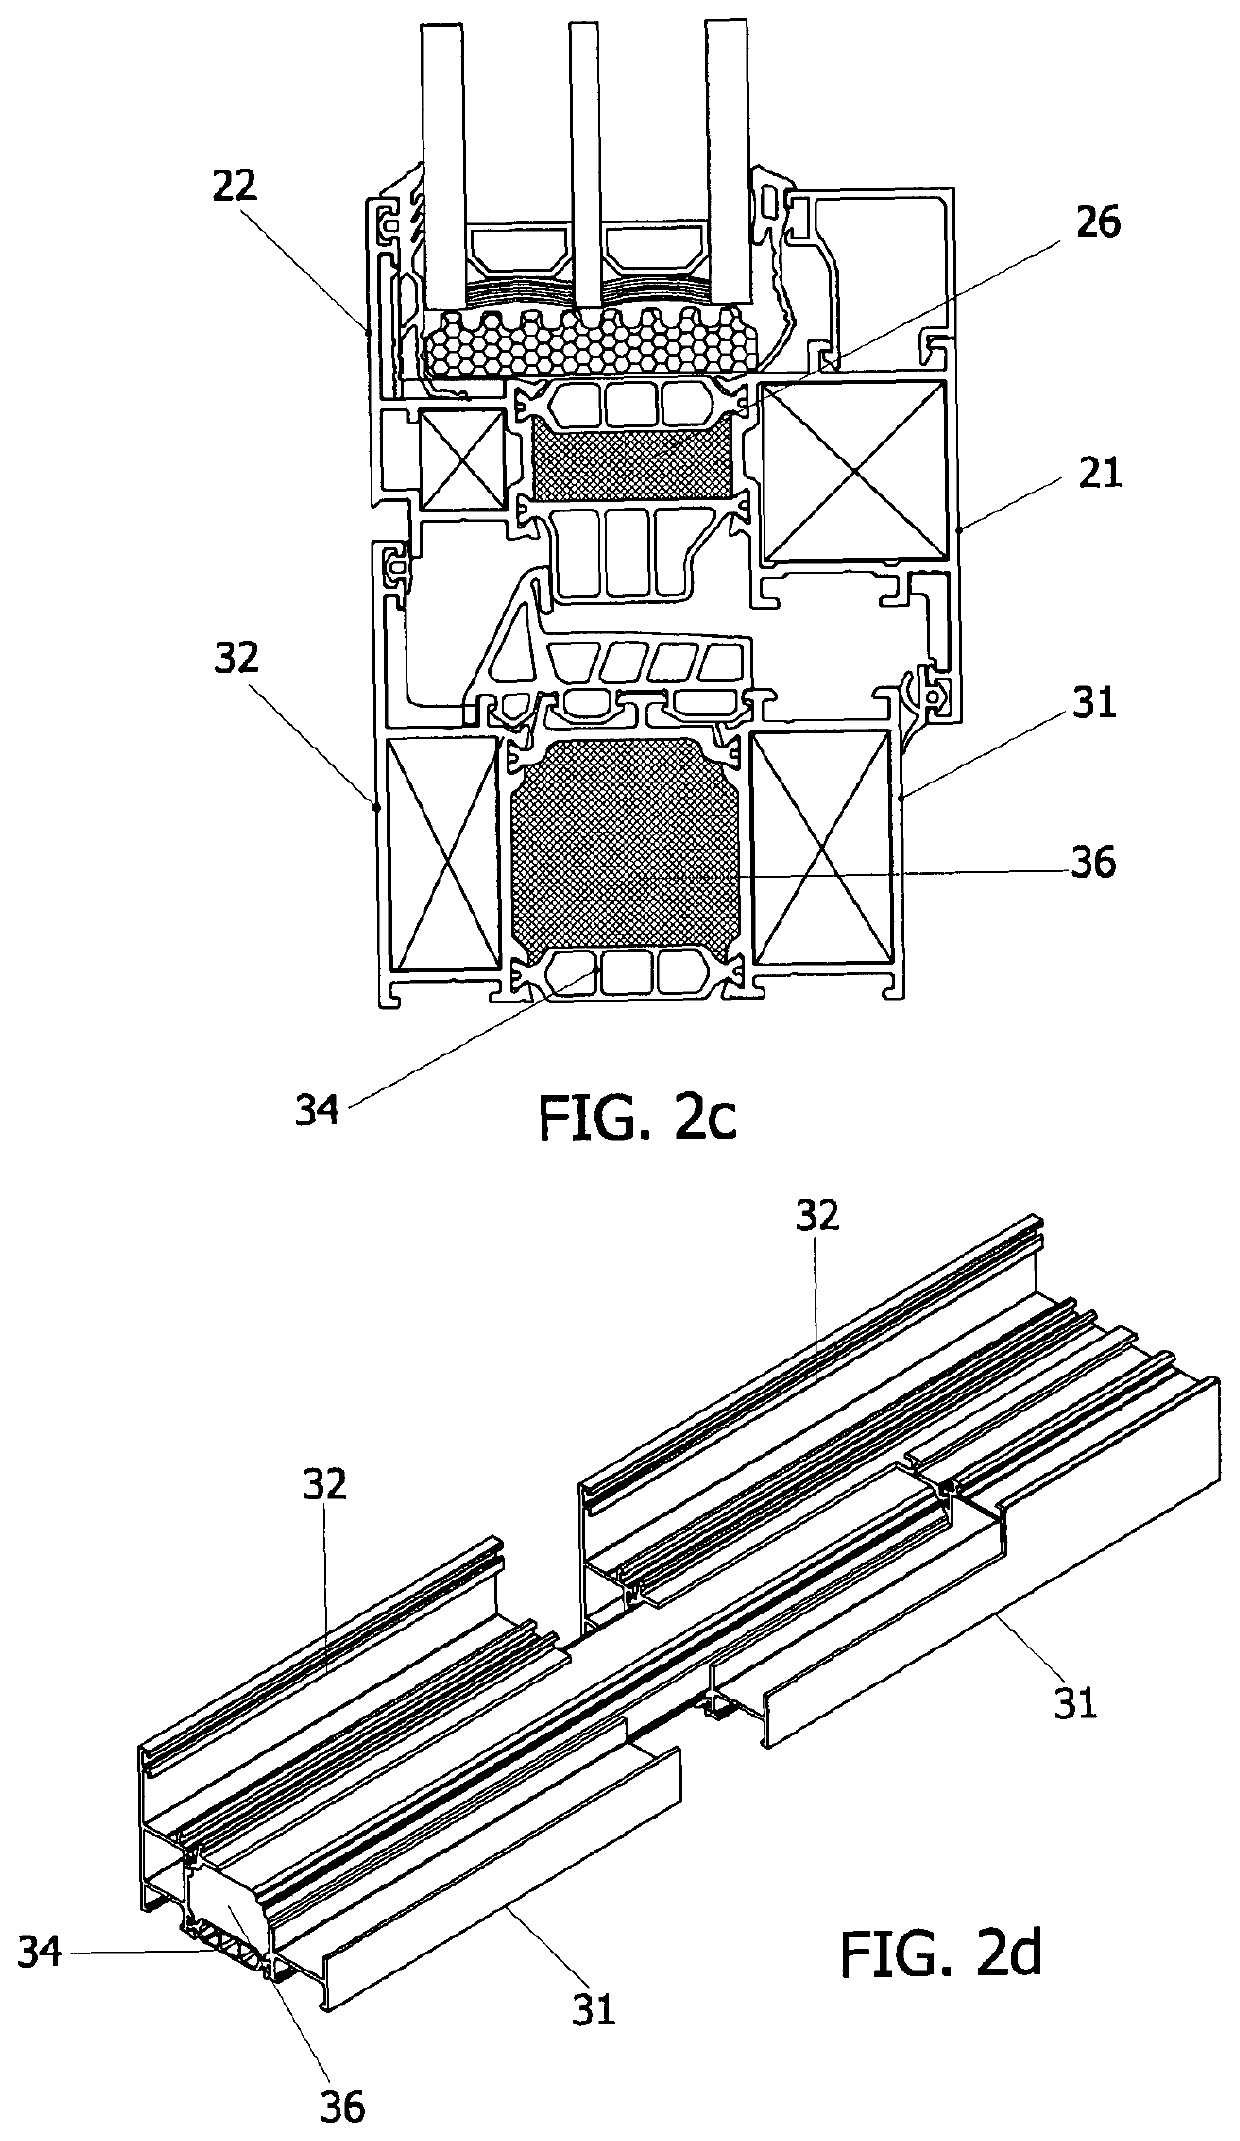 Device for delivering an insulation enhancing polyurethane foam within profiles used in doors, windows and related applications